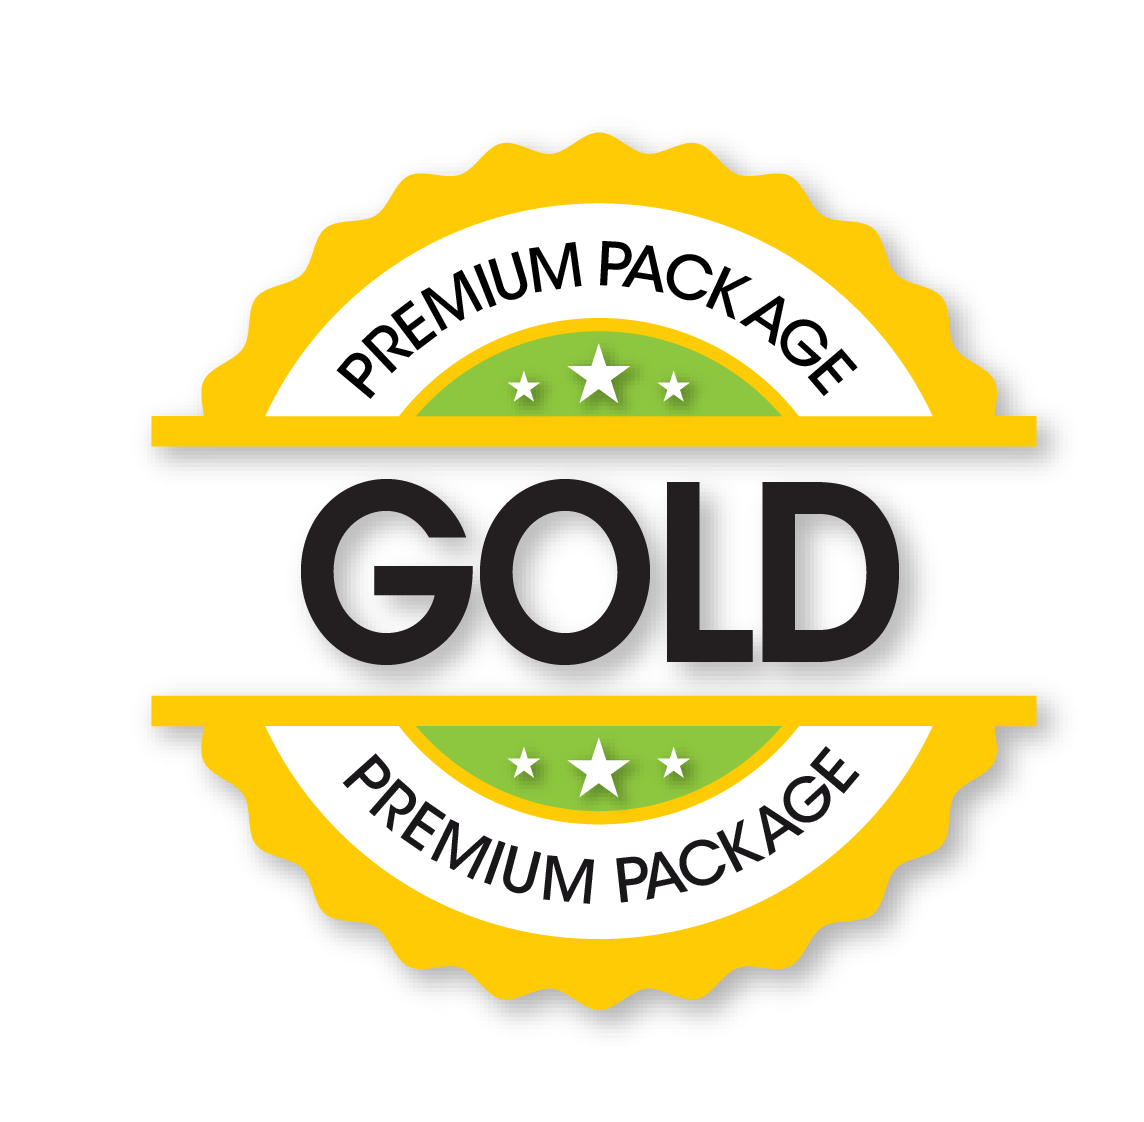 Gold - Premium Service Carpet Cleaning Package